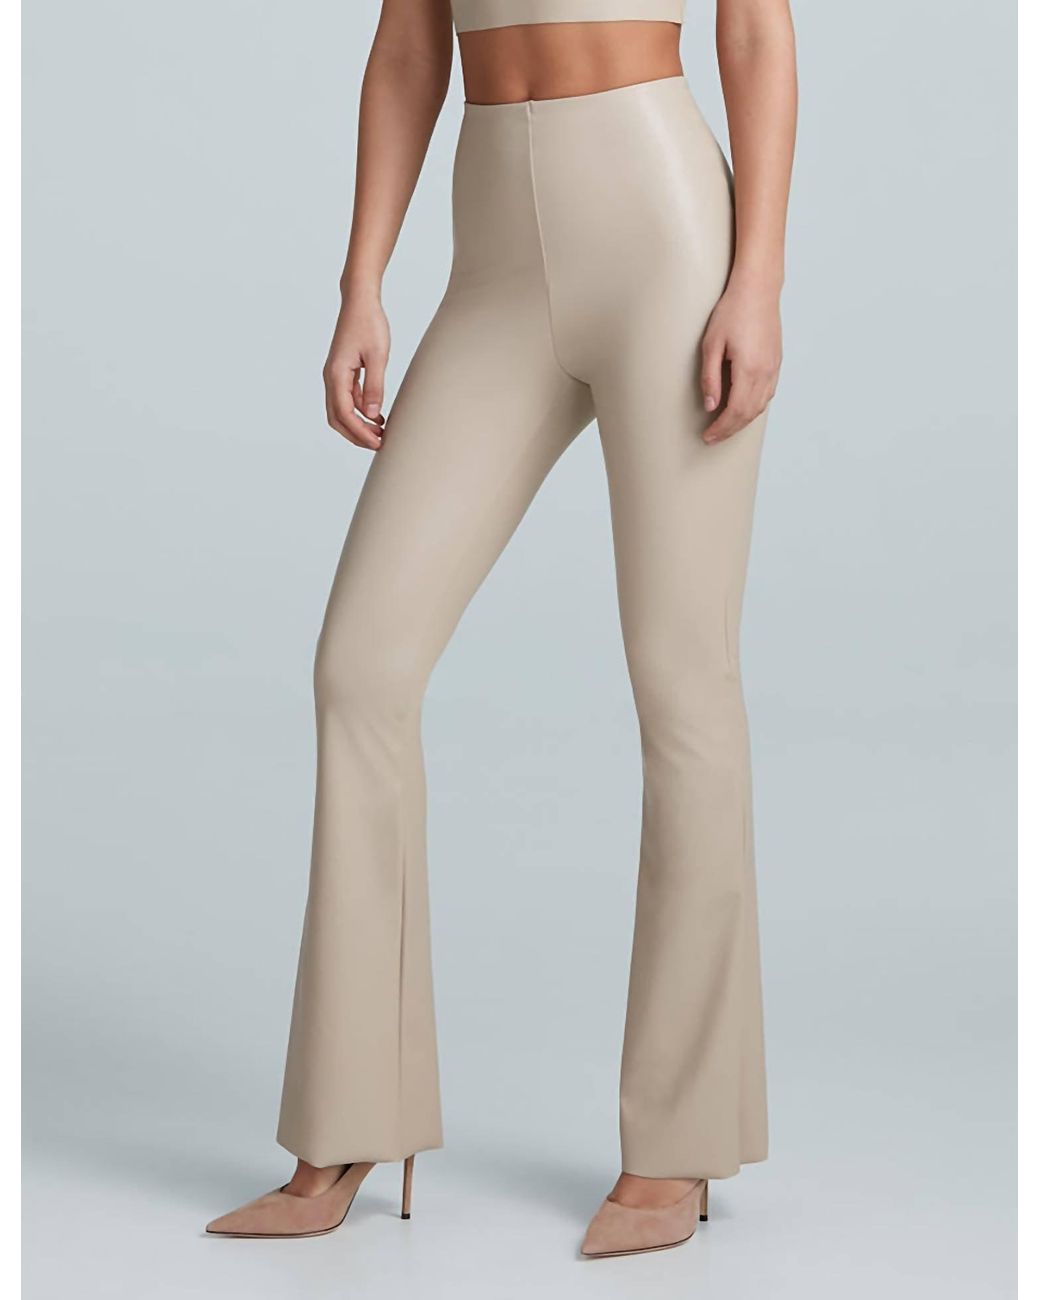 Commando Faux Leather Flare Legging In Sand in Natural